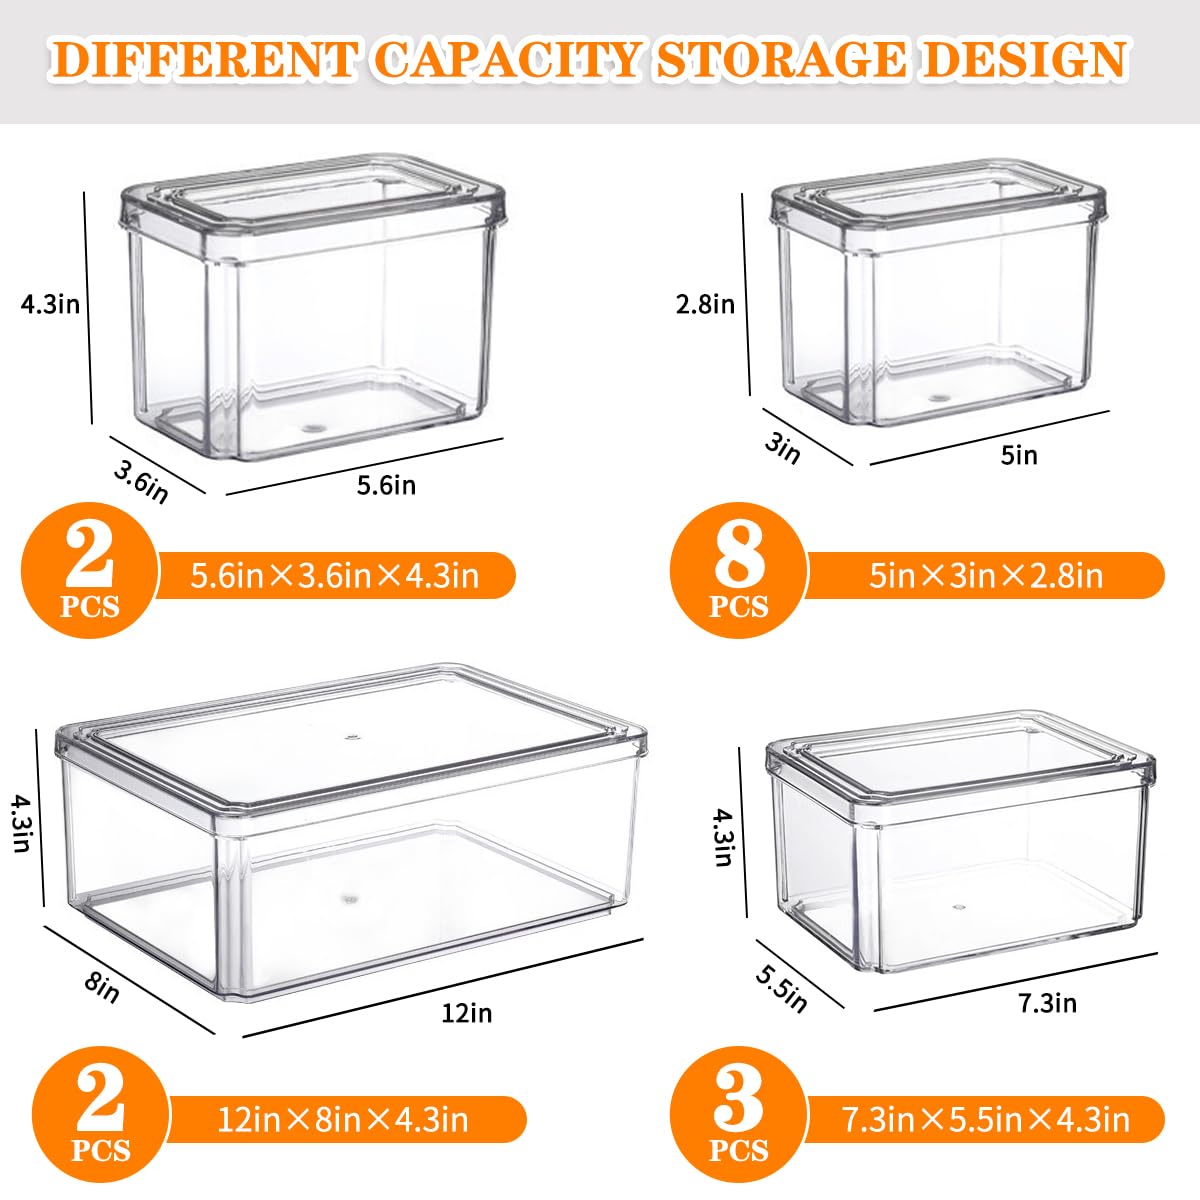 15 Pack Fridge Organizer, Stackable Refrigerator Organizer Bins with Lids PBA-Free, Clear Fridge Organizers and Storage for Kitchen, Countertops, Cabinets, Fridge, Drinks, Fruits, Vegetable, Cereals